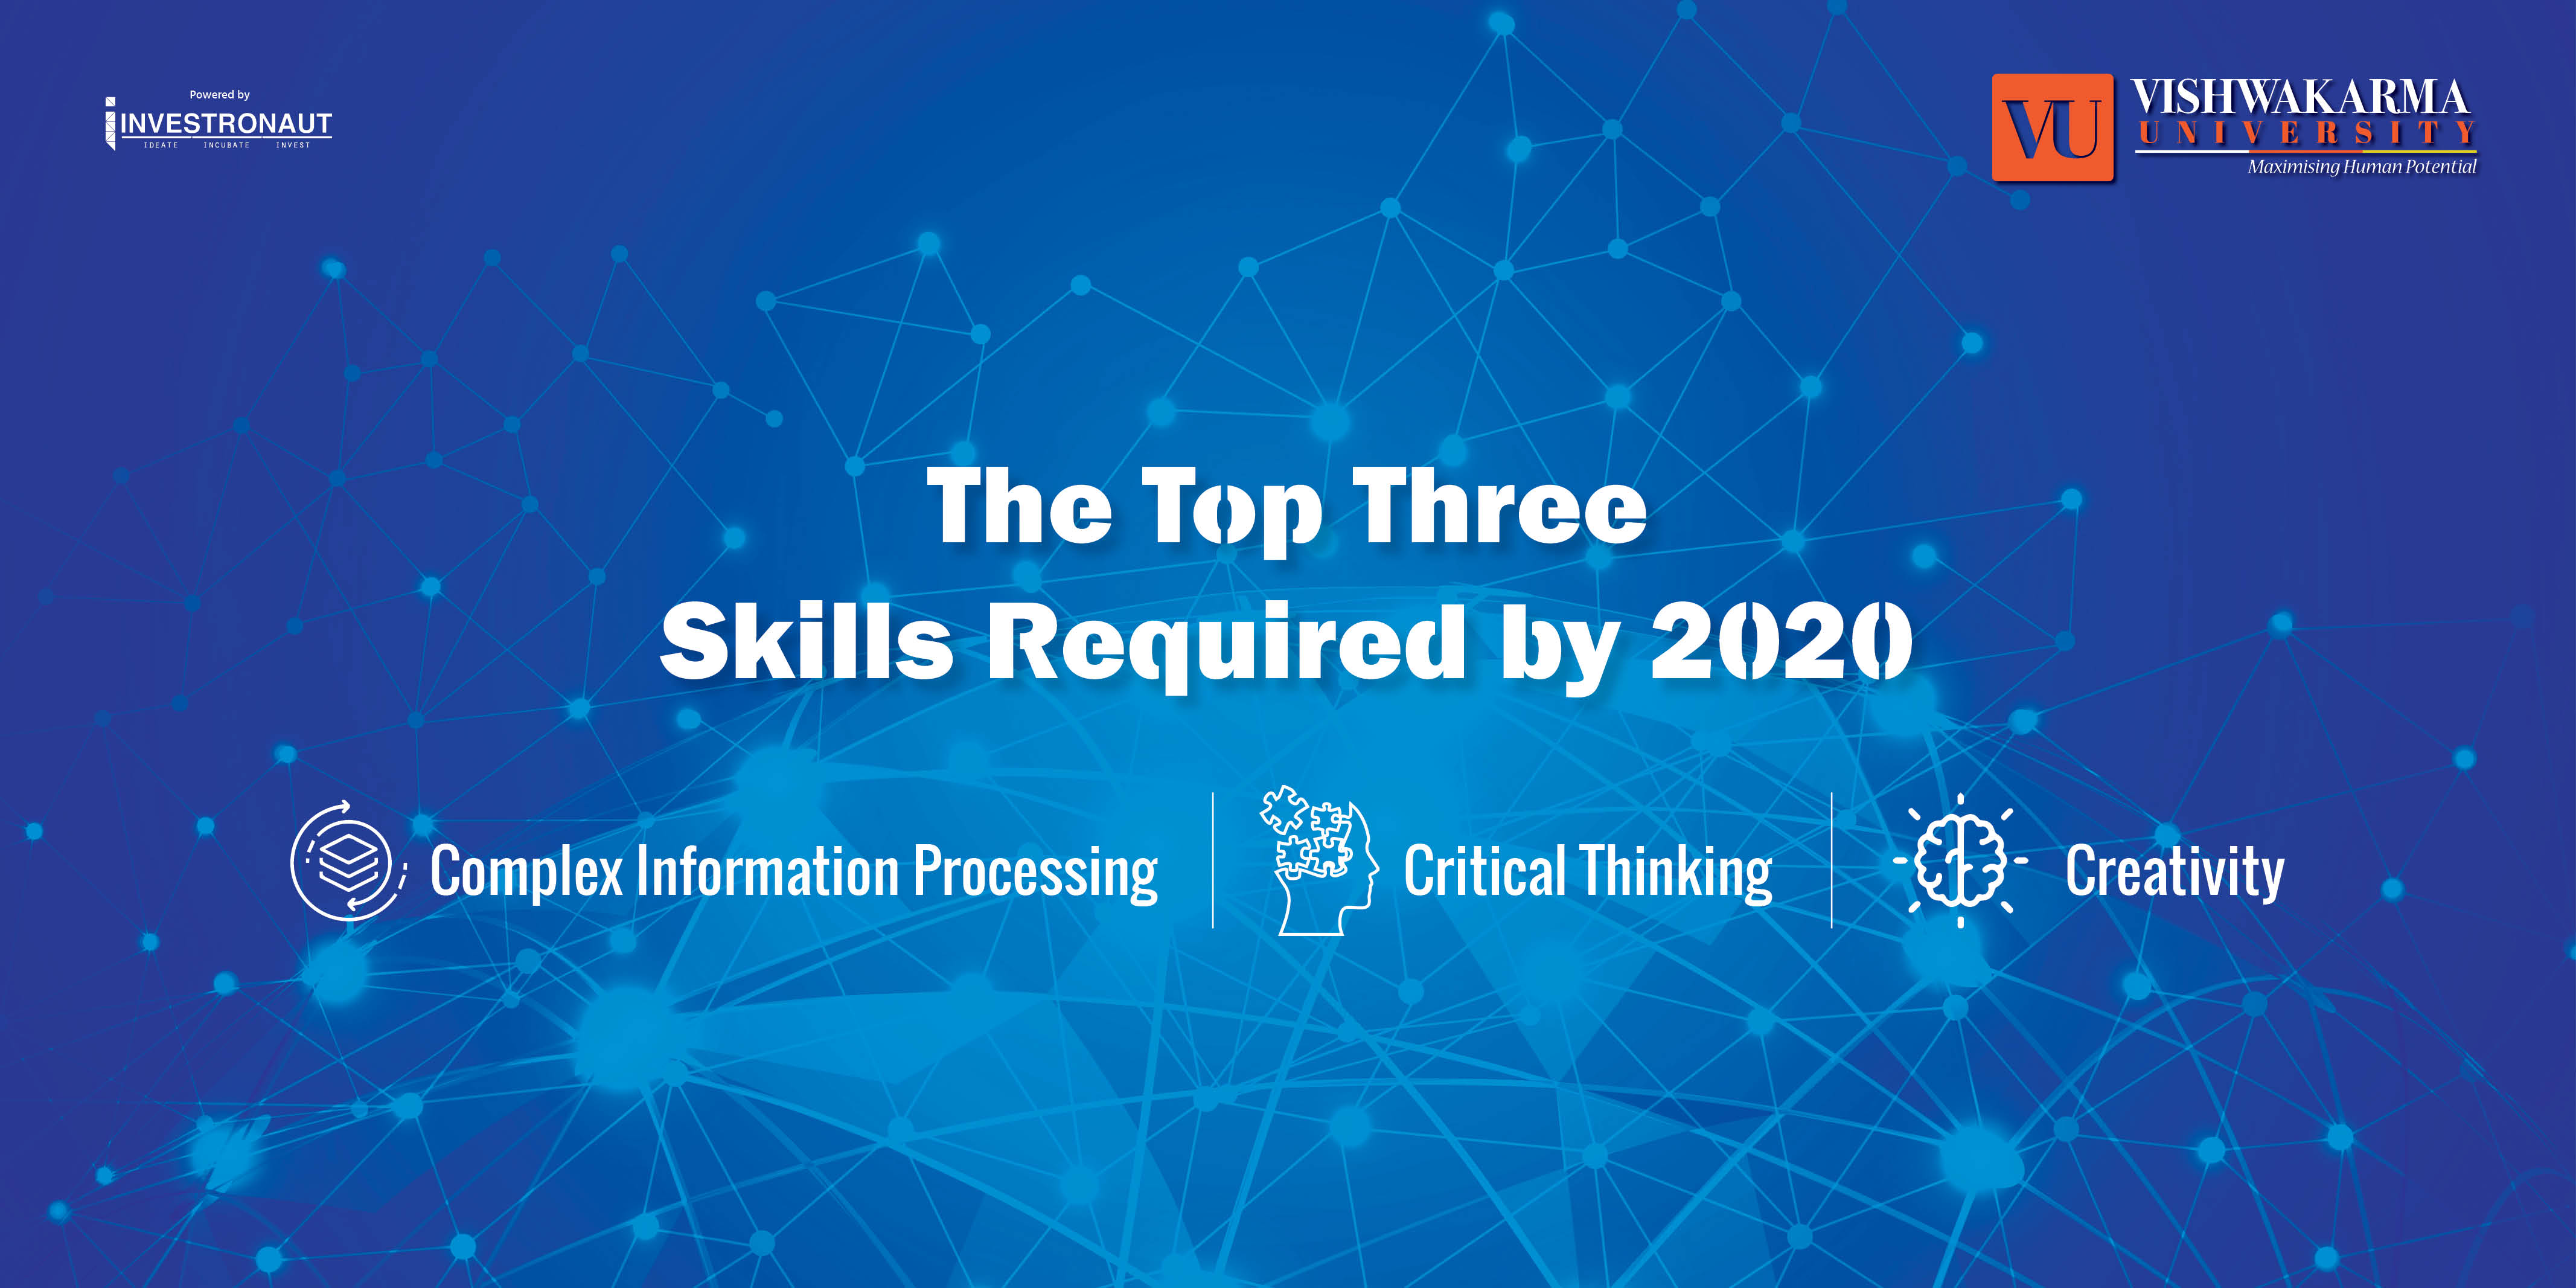 Linkedlin Post For The top three skills required by 2020